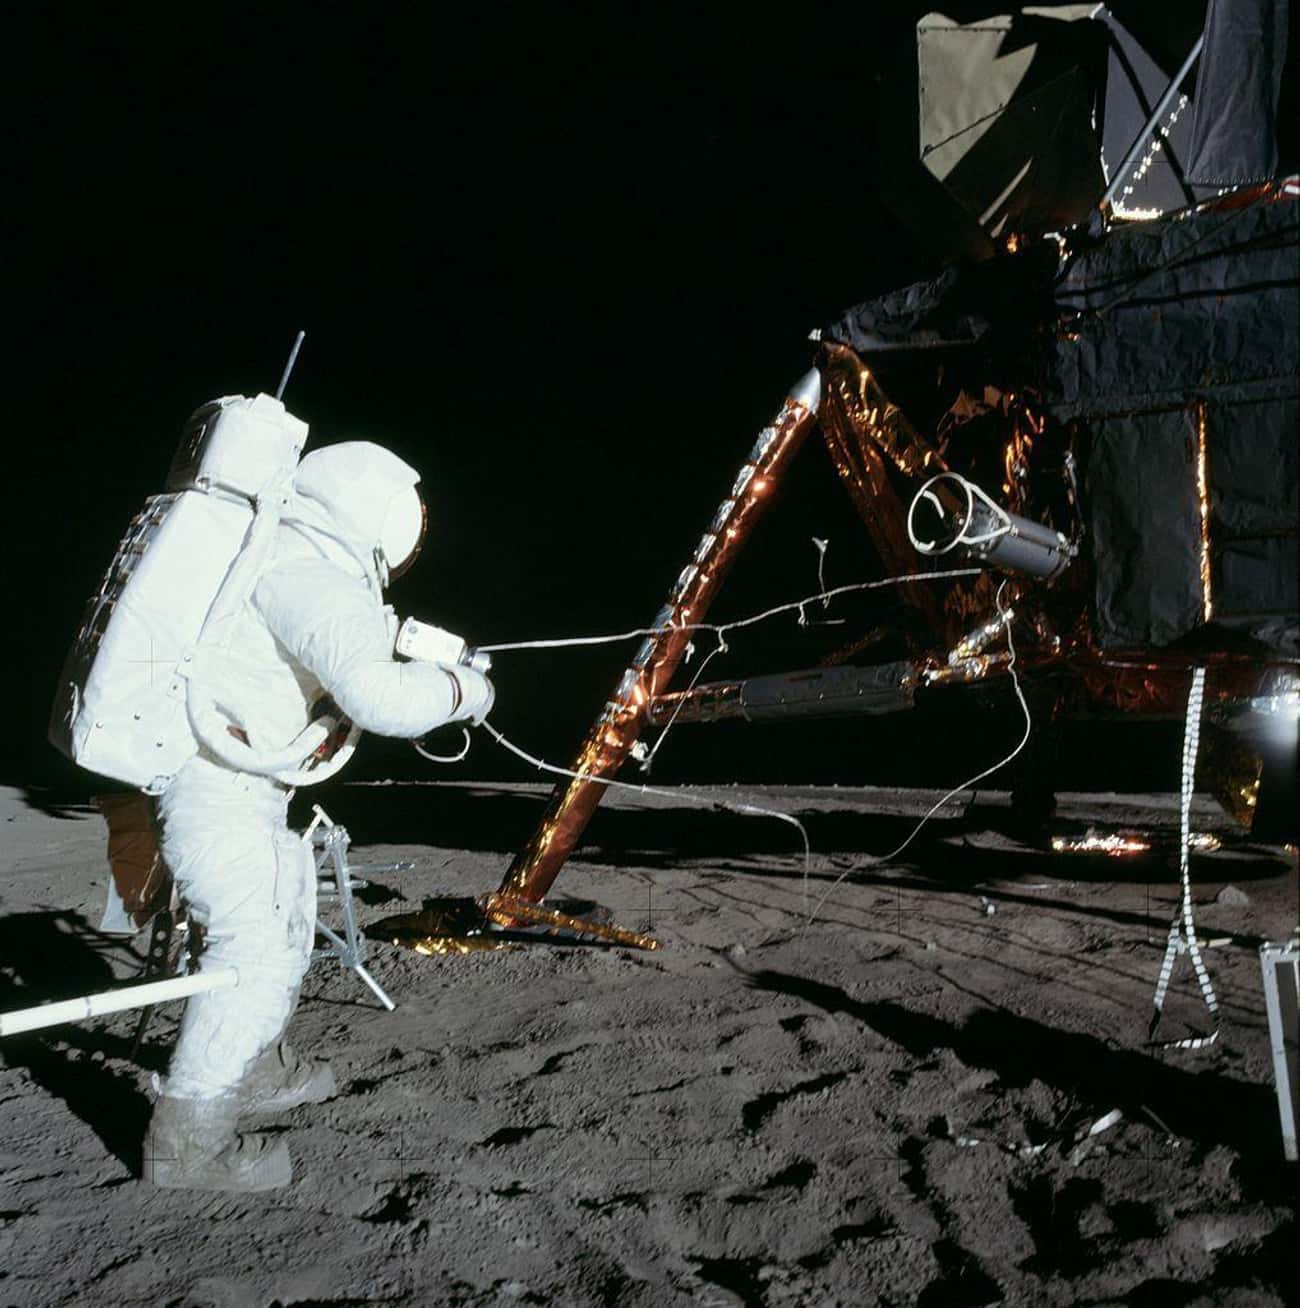 A Conspiracy Theorist Thinks Alan Bean Saw Glass Domes On The Moon